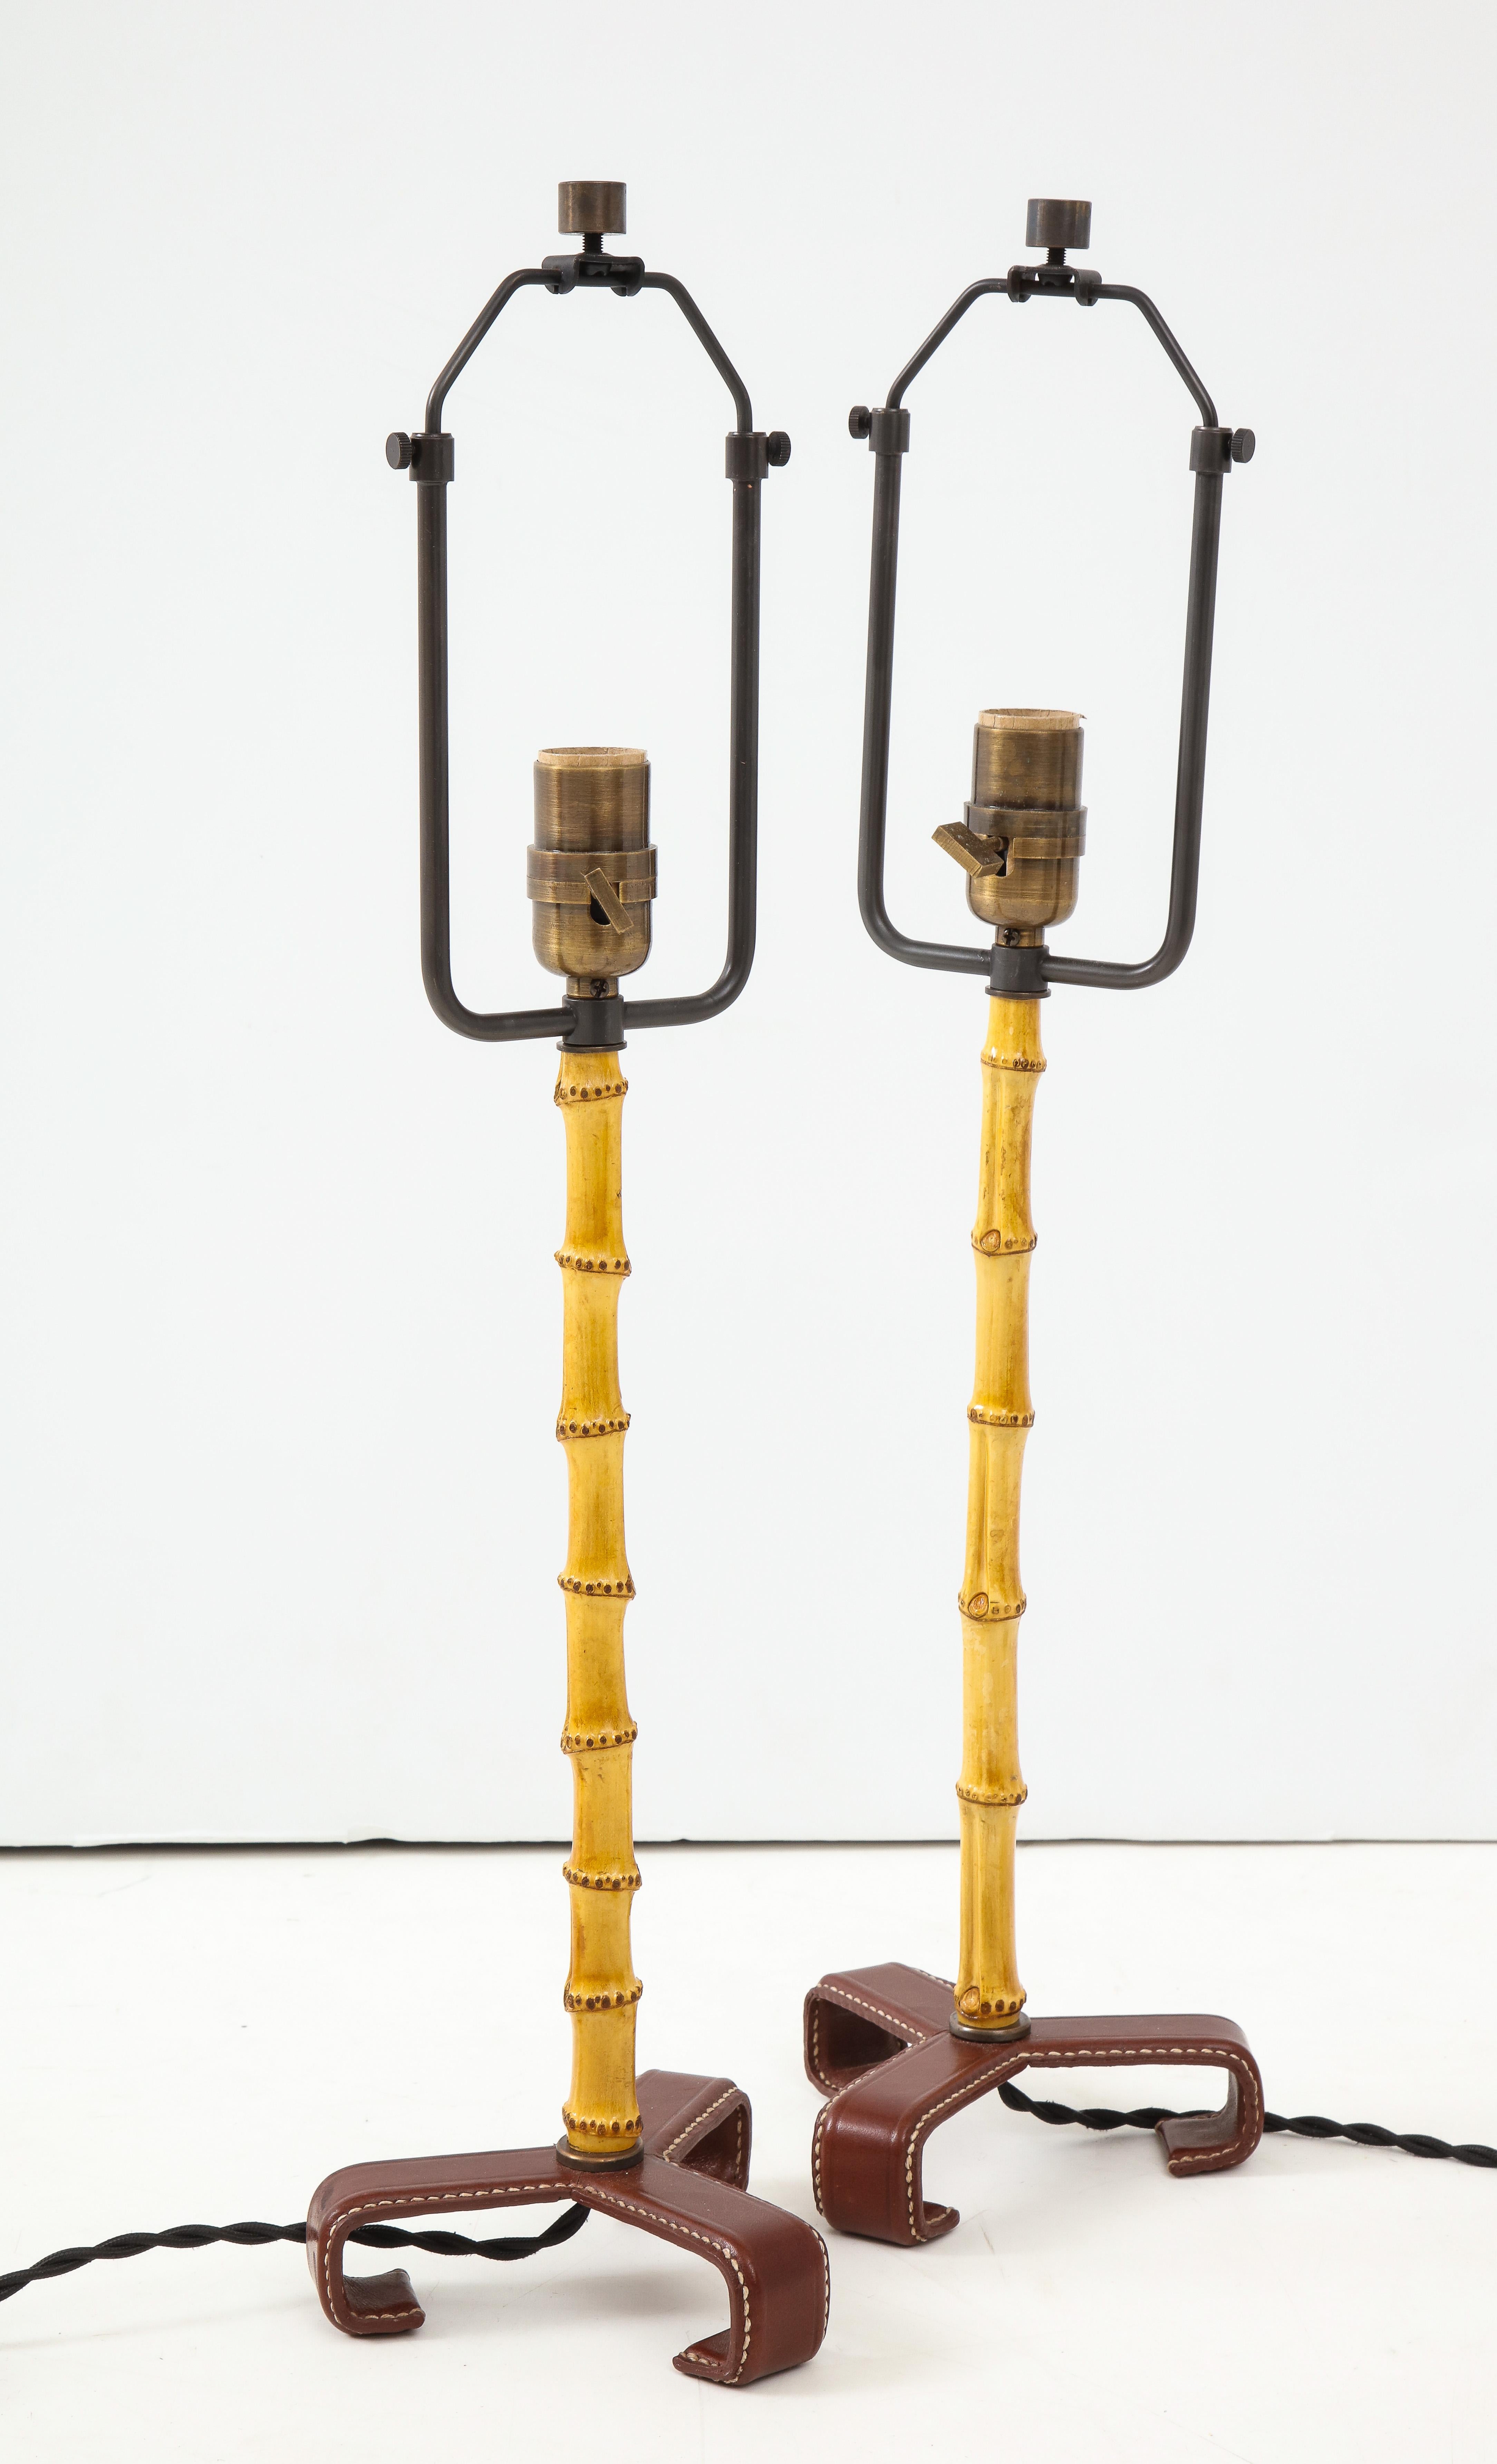 Exceptional pair of Jacques Adnet table lamps from France, c. 1950s. Elegant composition includes a stitched leather tripod base, natural bamboo body, and brass socket.  

Sold as a pair.